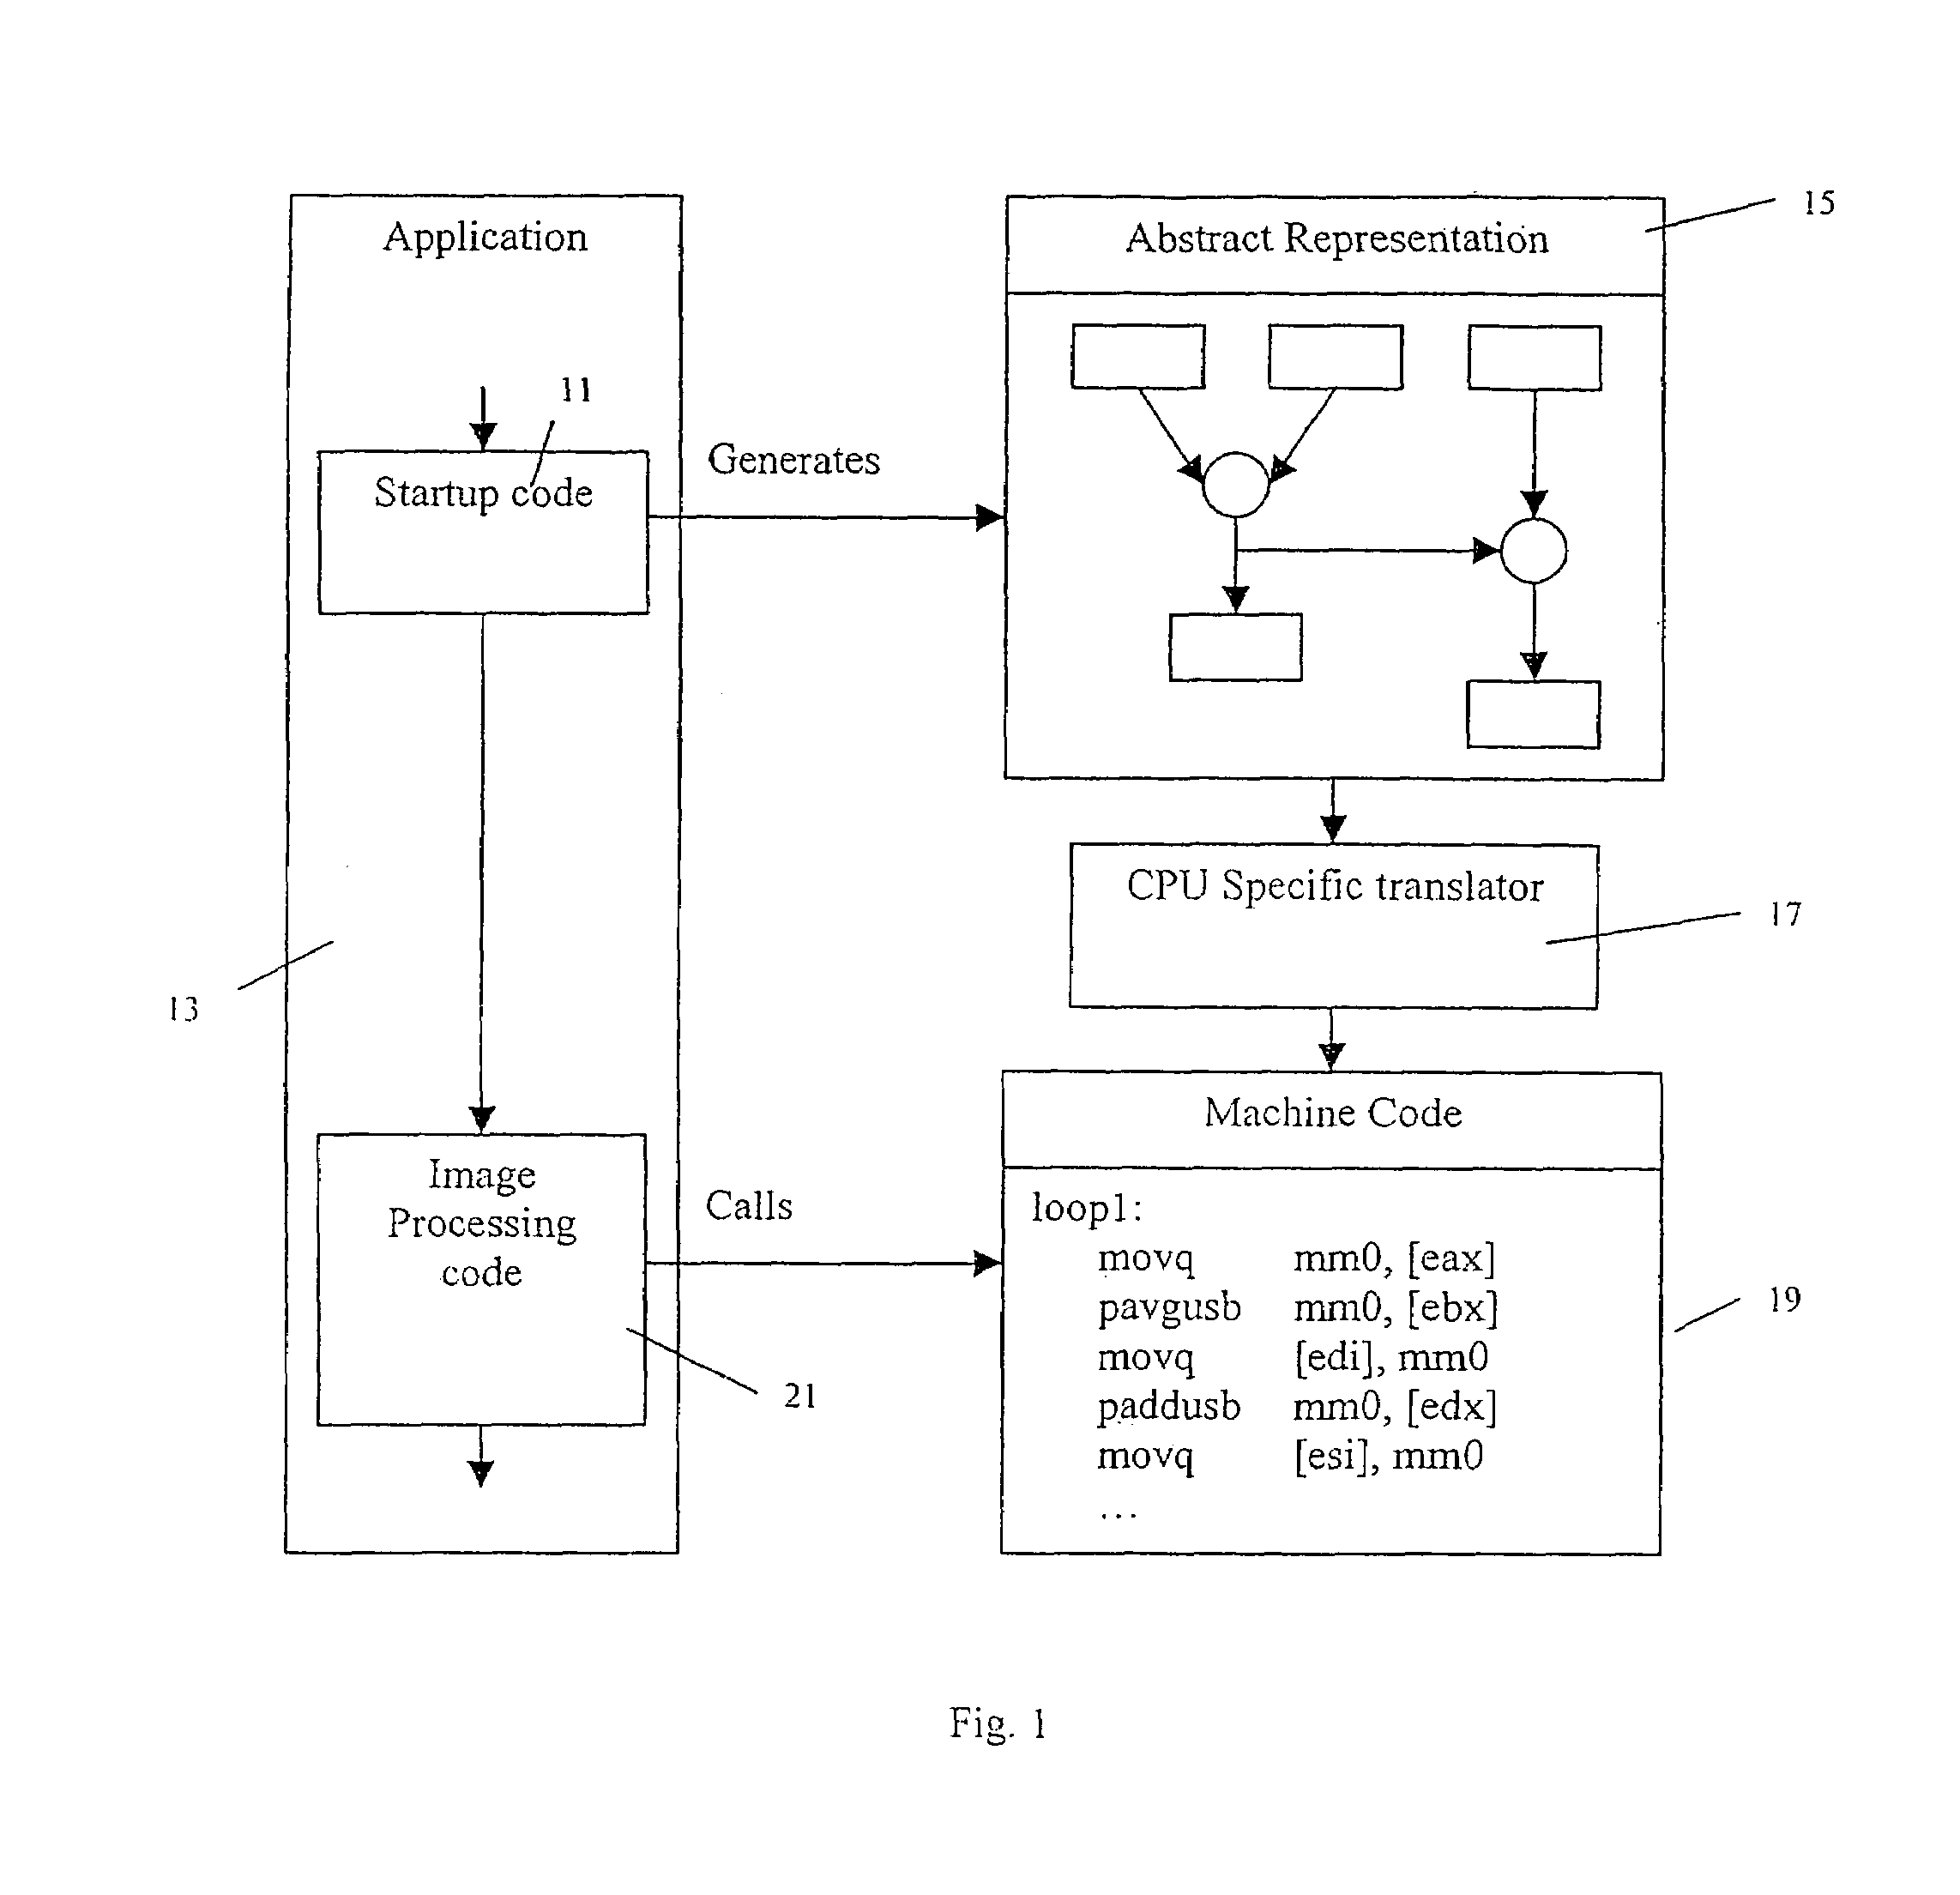 Dynamic generation of multimedia code for image processing